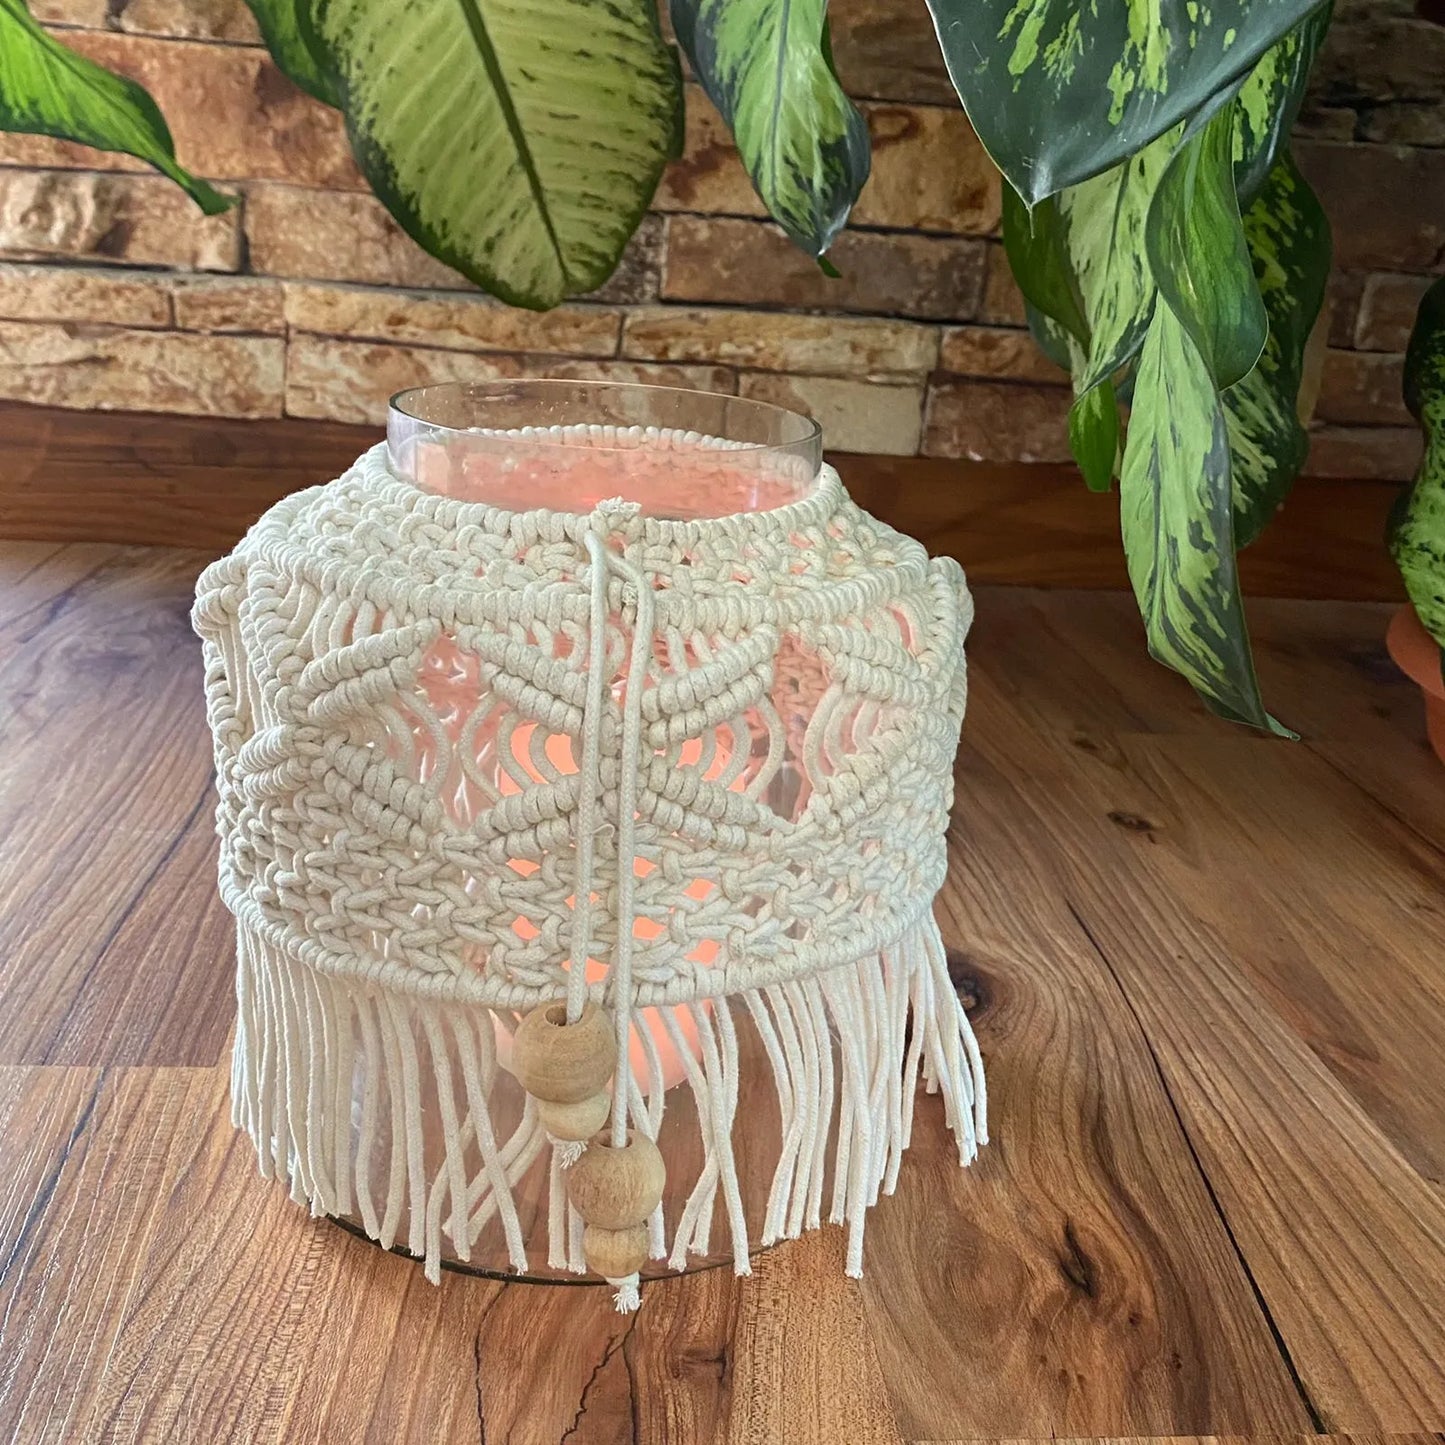 Avioni Home Boho Collection – Large Glass Hurricane Jar With Hand-knitted Macramé Cover